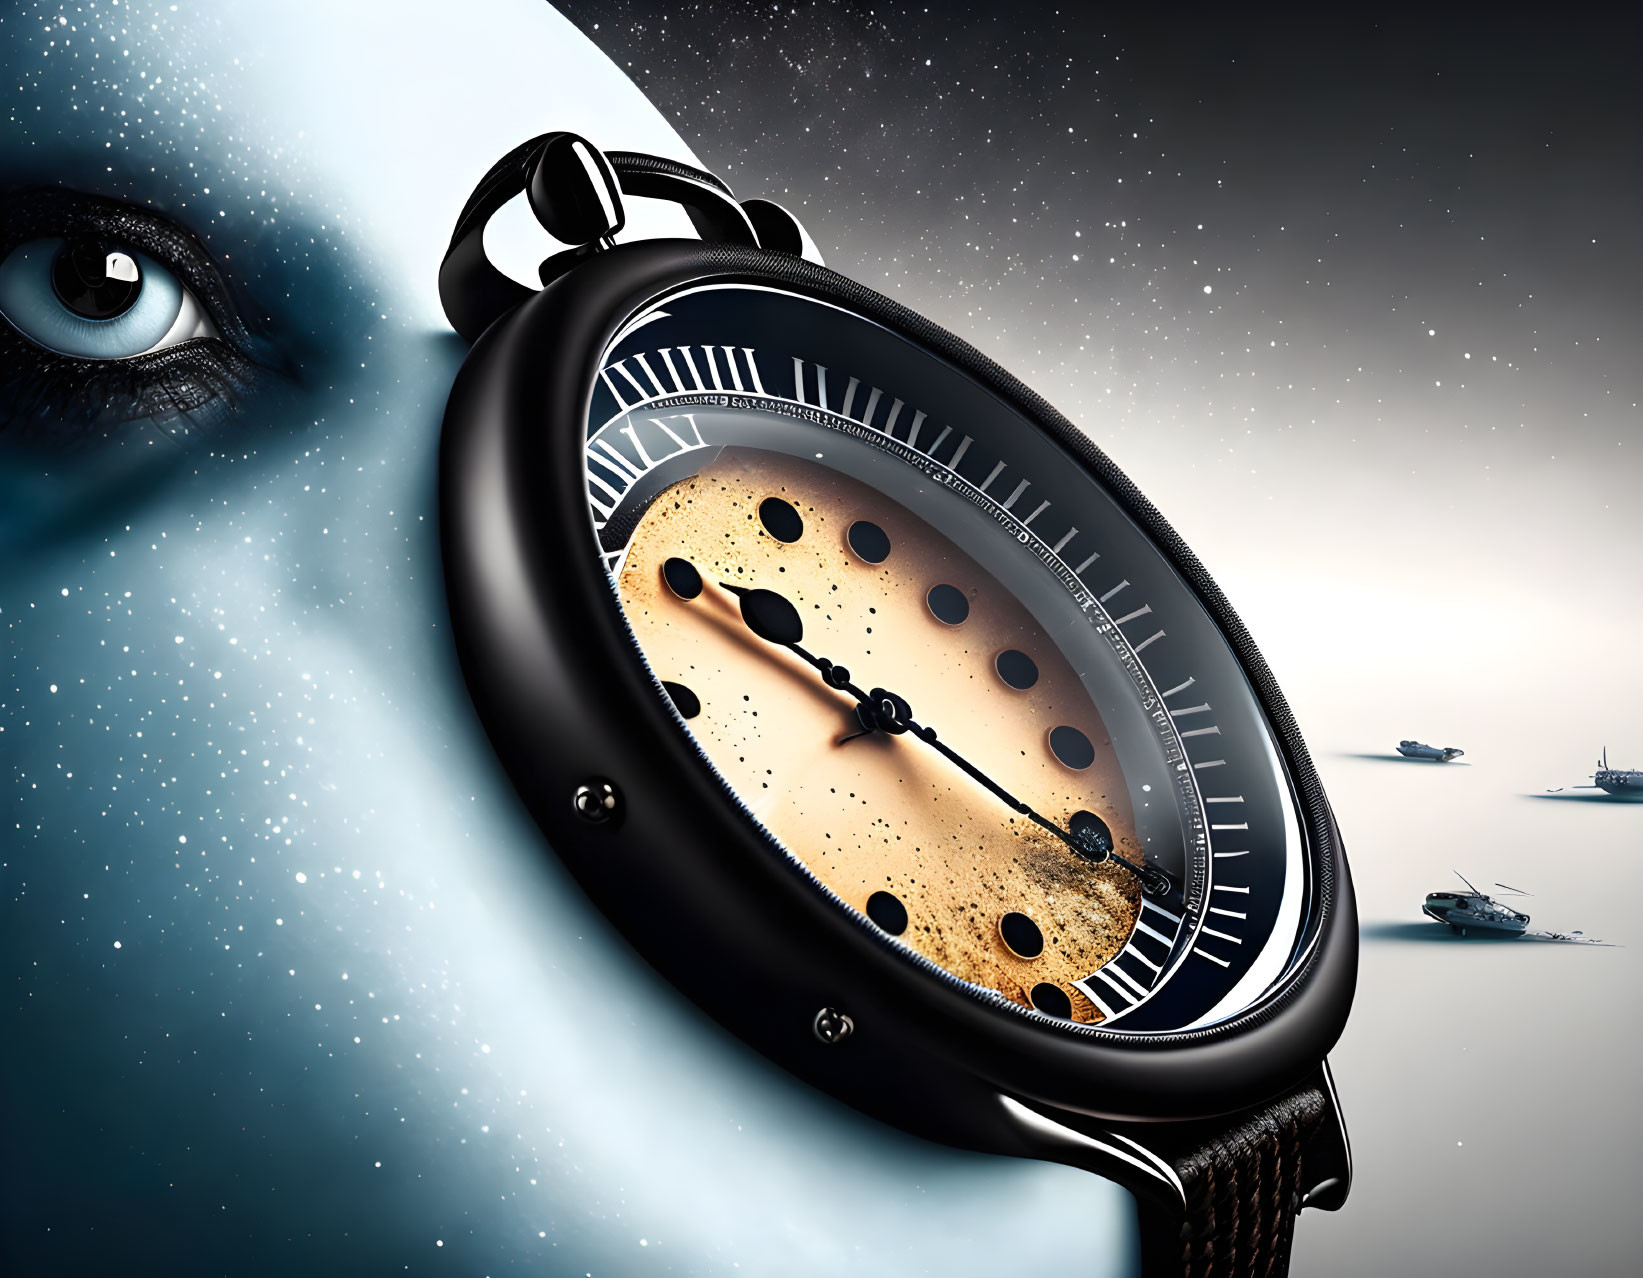 Surreal image of giant wristwatch and human eye in space with moon-like watch face and tiny